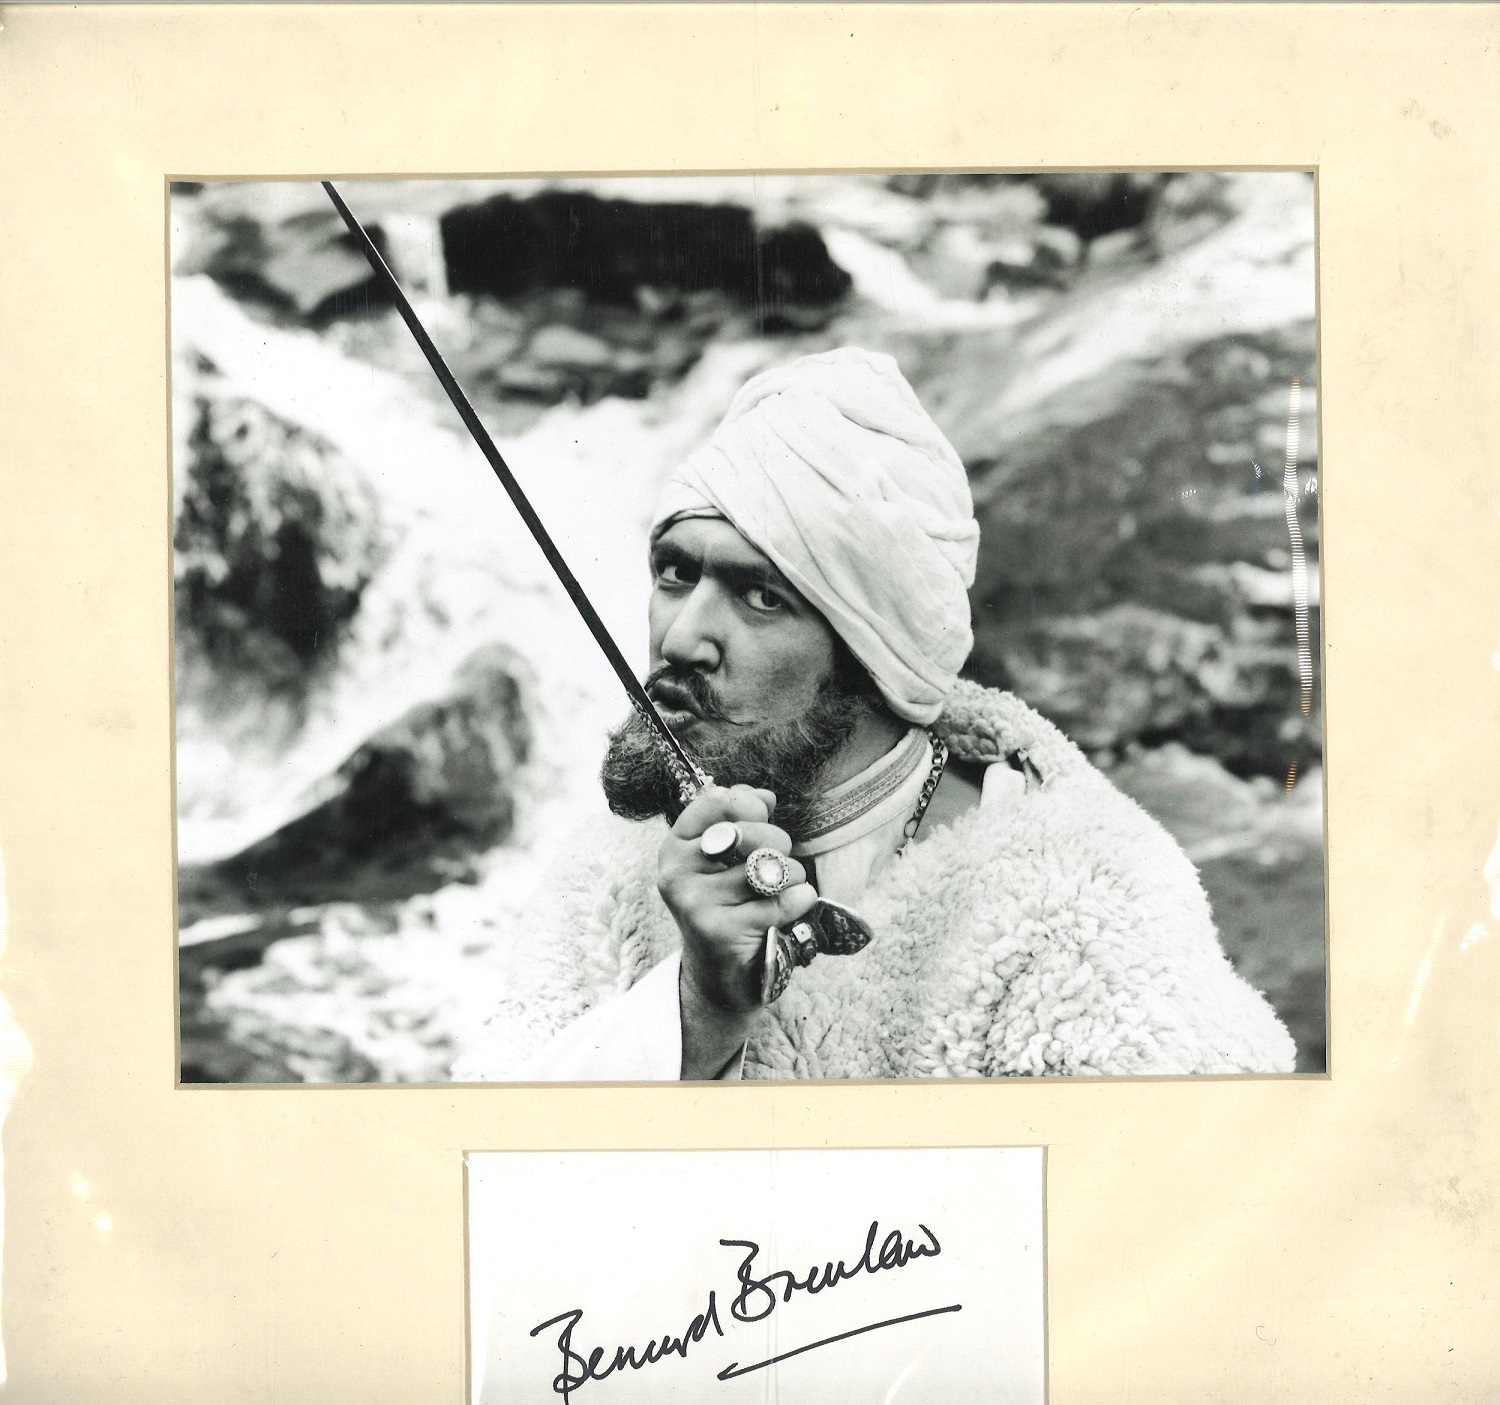 Bernard Bresslaw Carry on autographed page mounted with 10 x 8 inch b/w photo to approx. 12 x 12